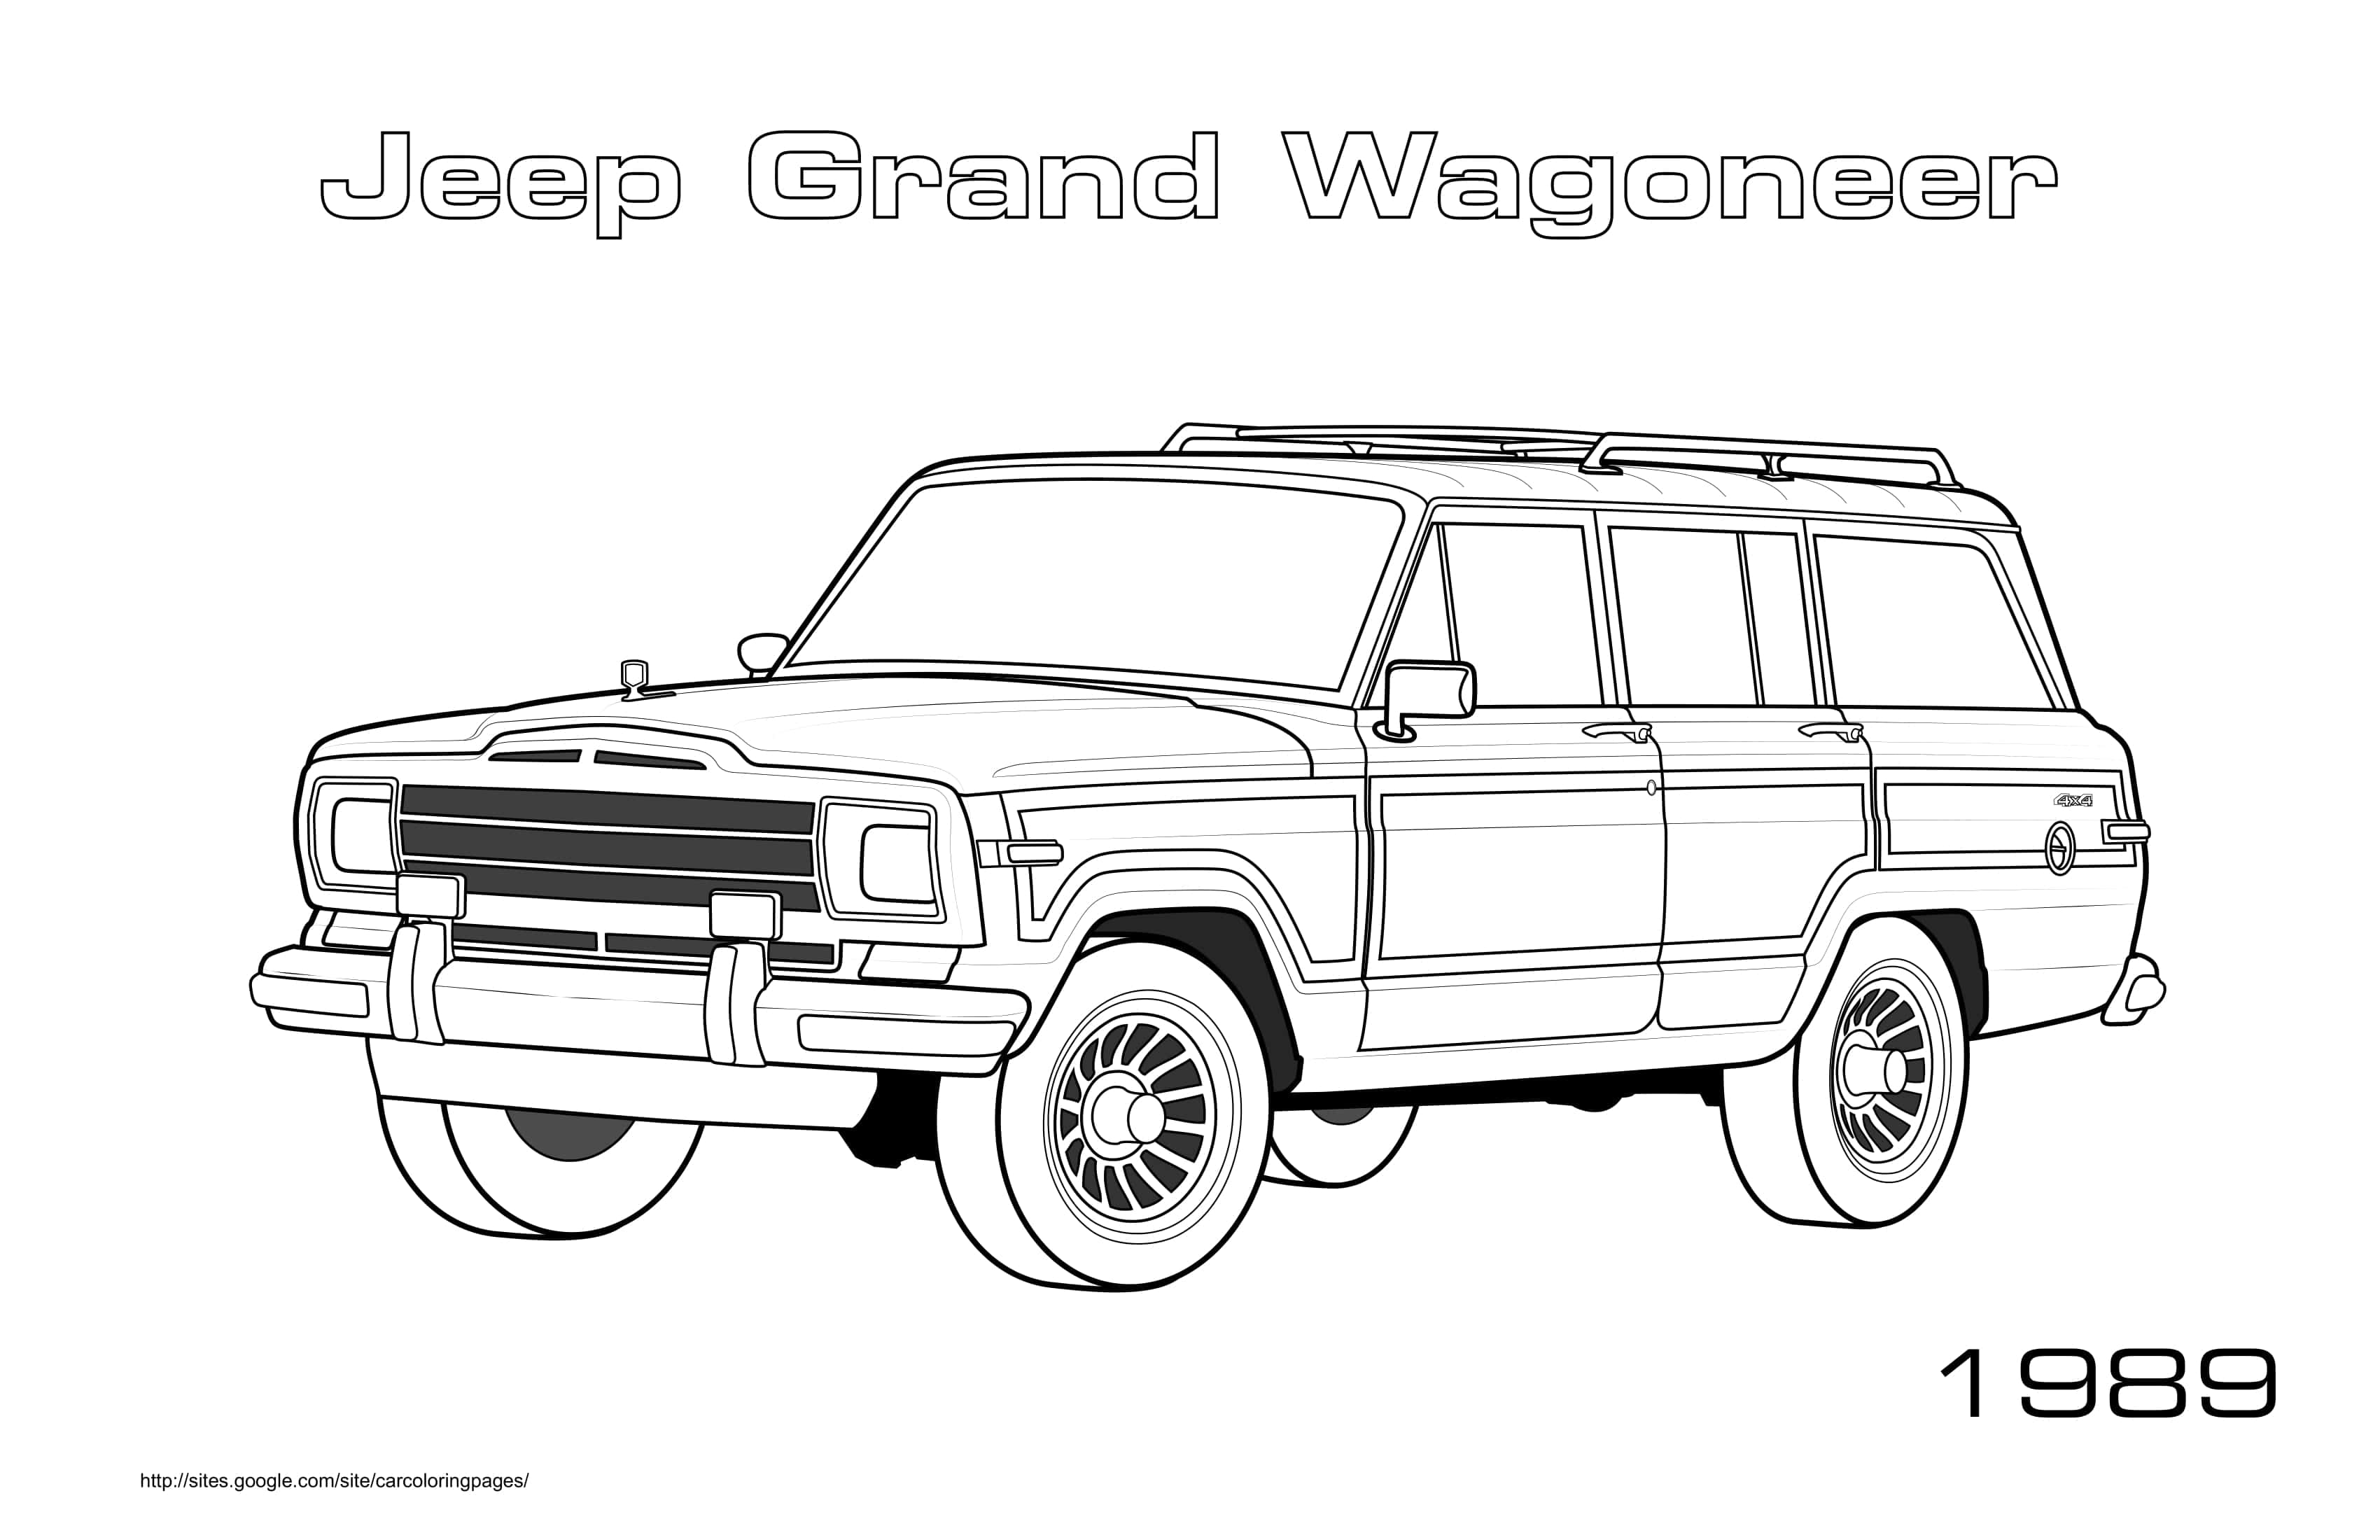 Jeep Grand Wagoneer 1989 Coloring Page